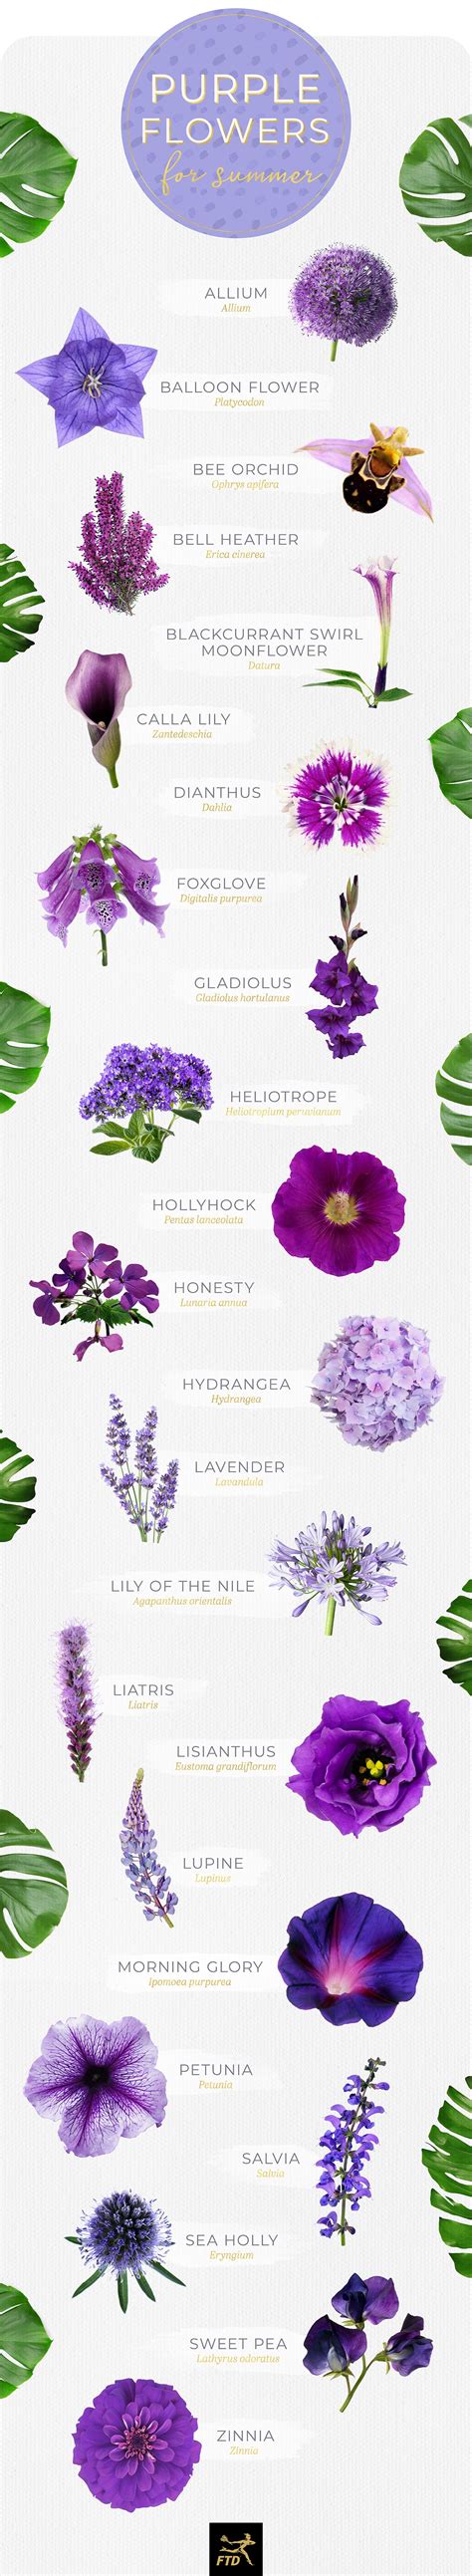 Names And Pictures Of Purple Flowers